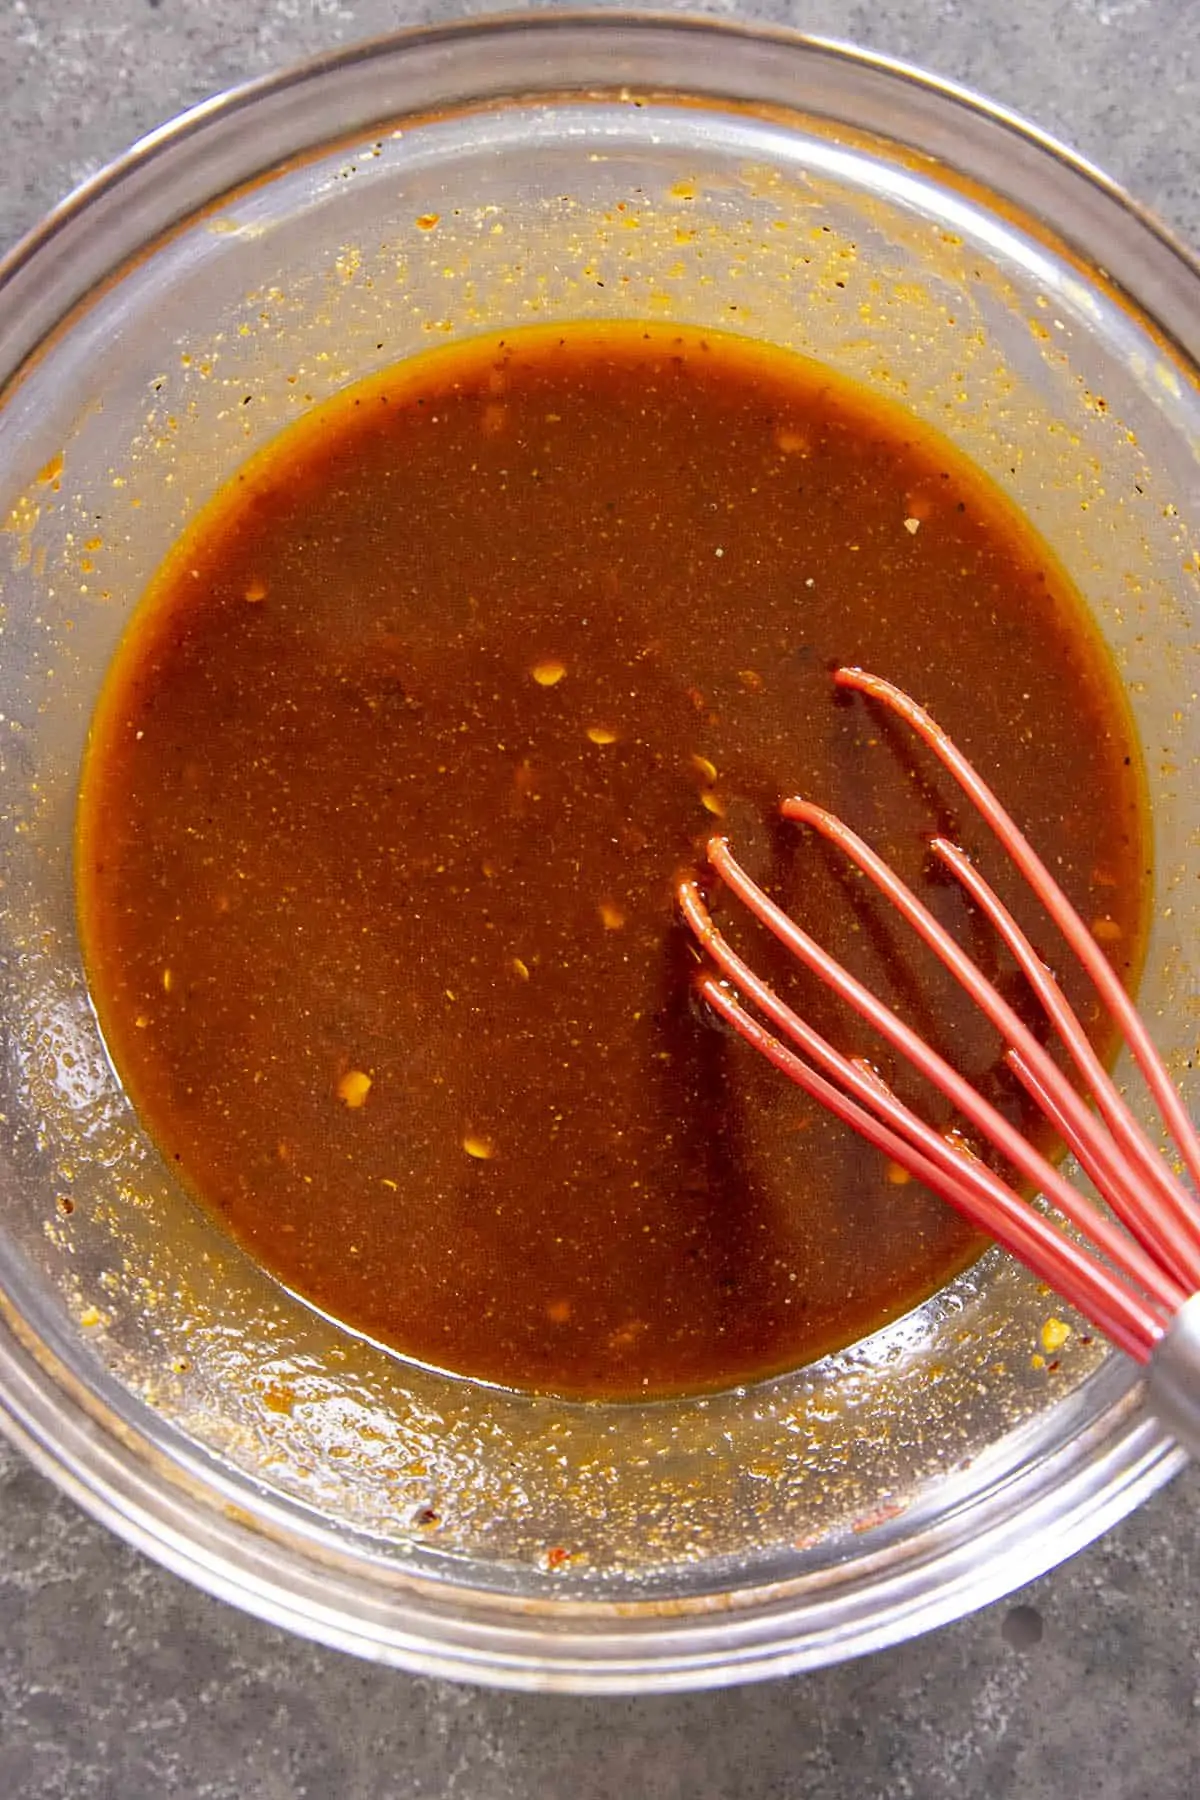 Spicy Korean Sauce in a bowl.